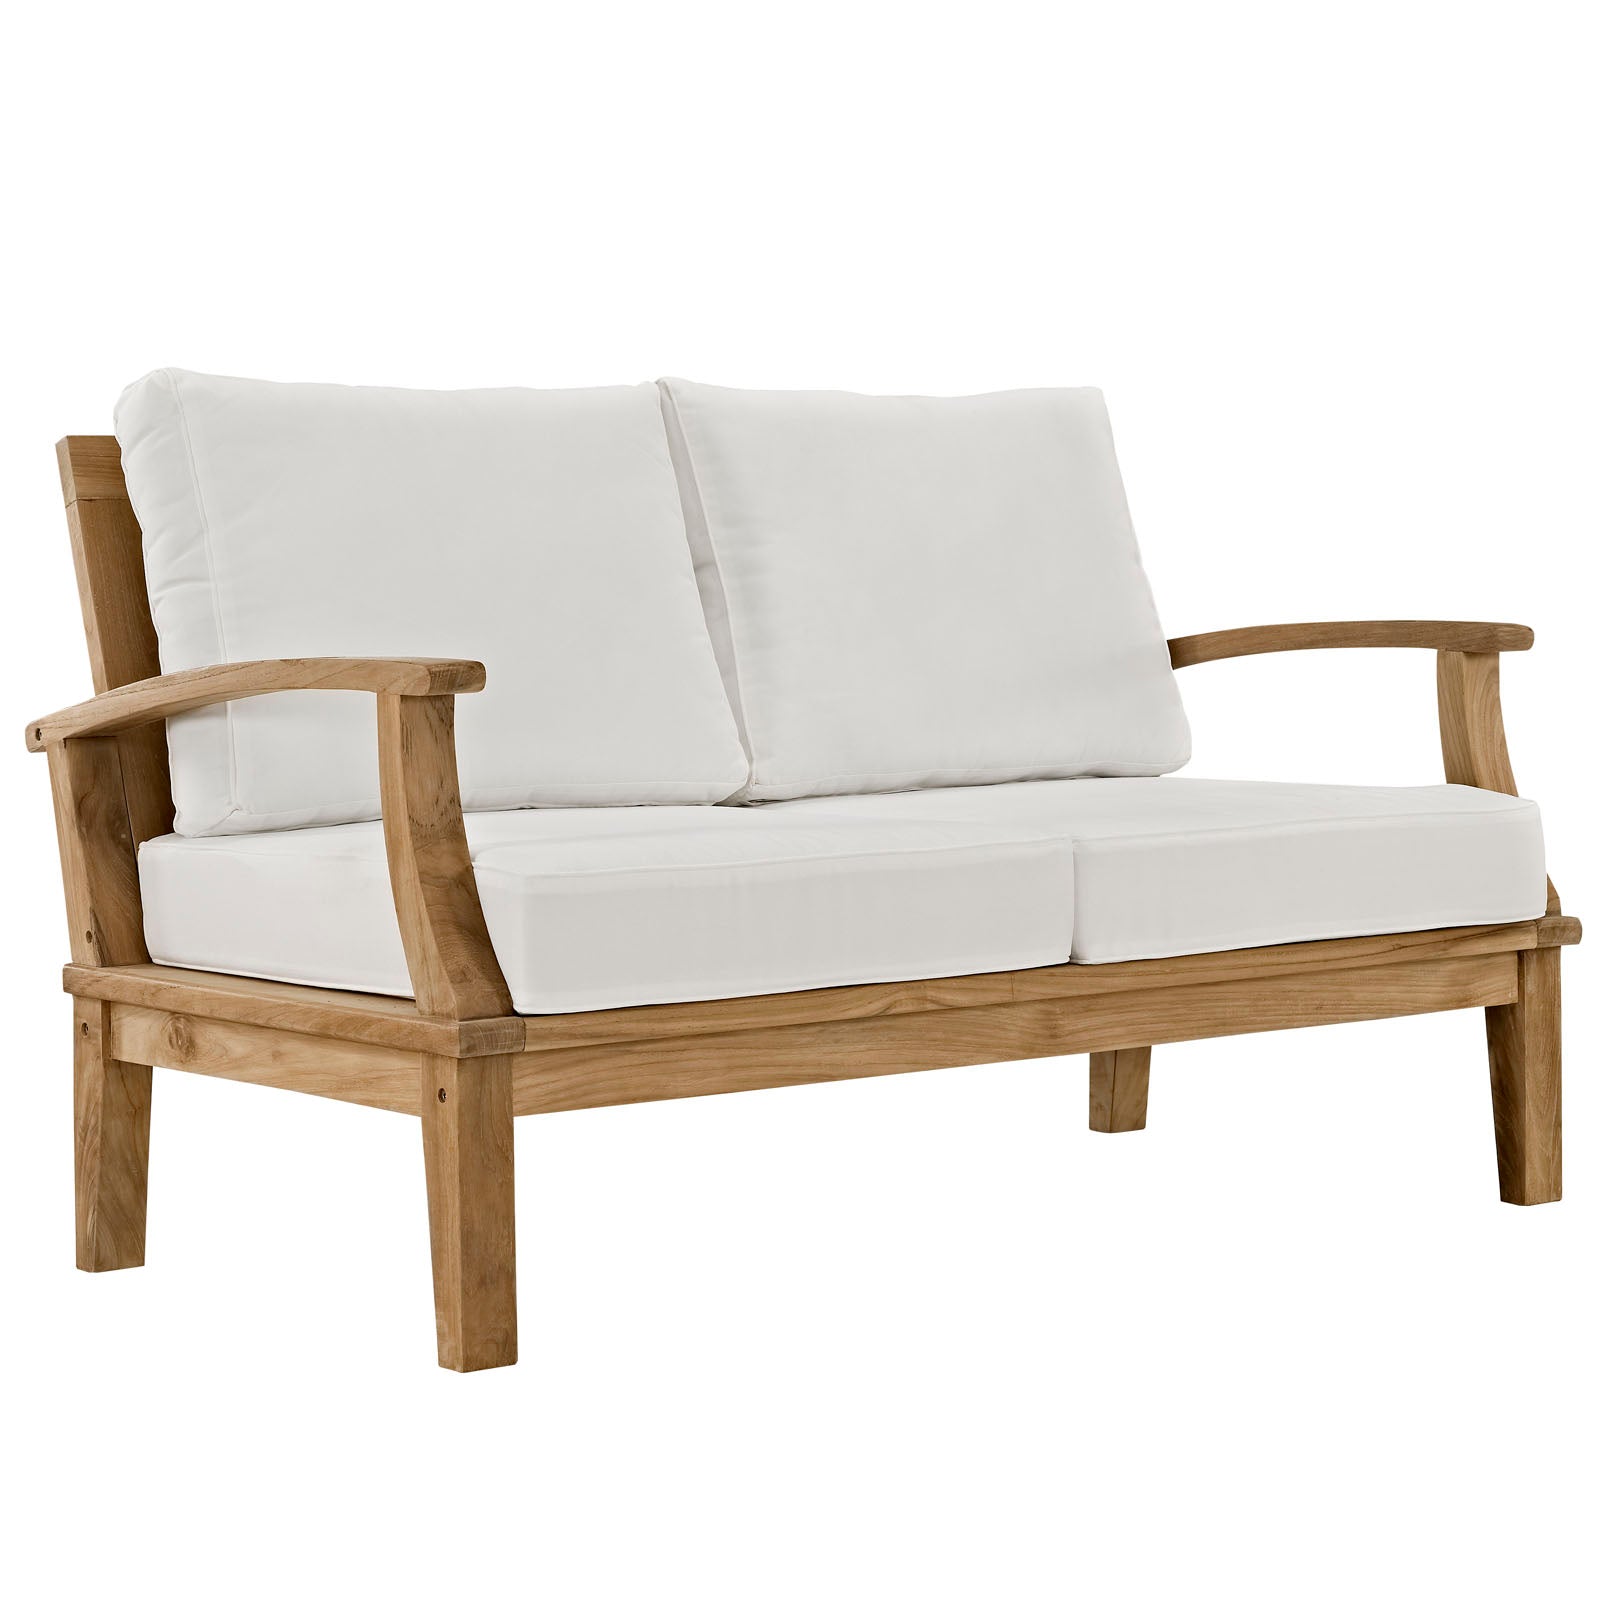 Modway Outdoor Sofas - Marina Outdoor Loveseat White & Natural